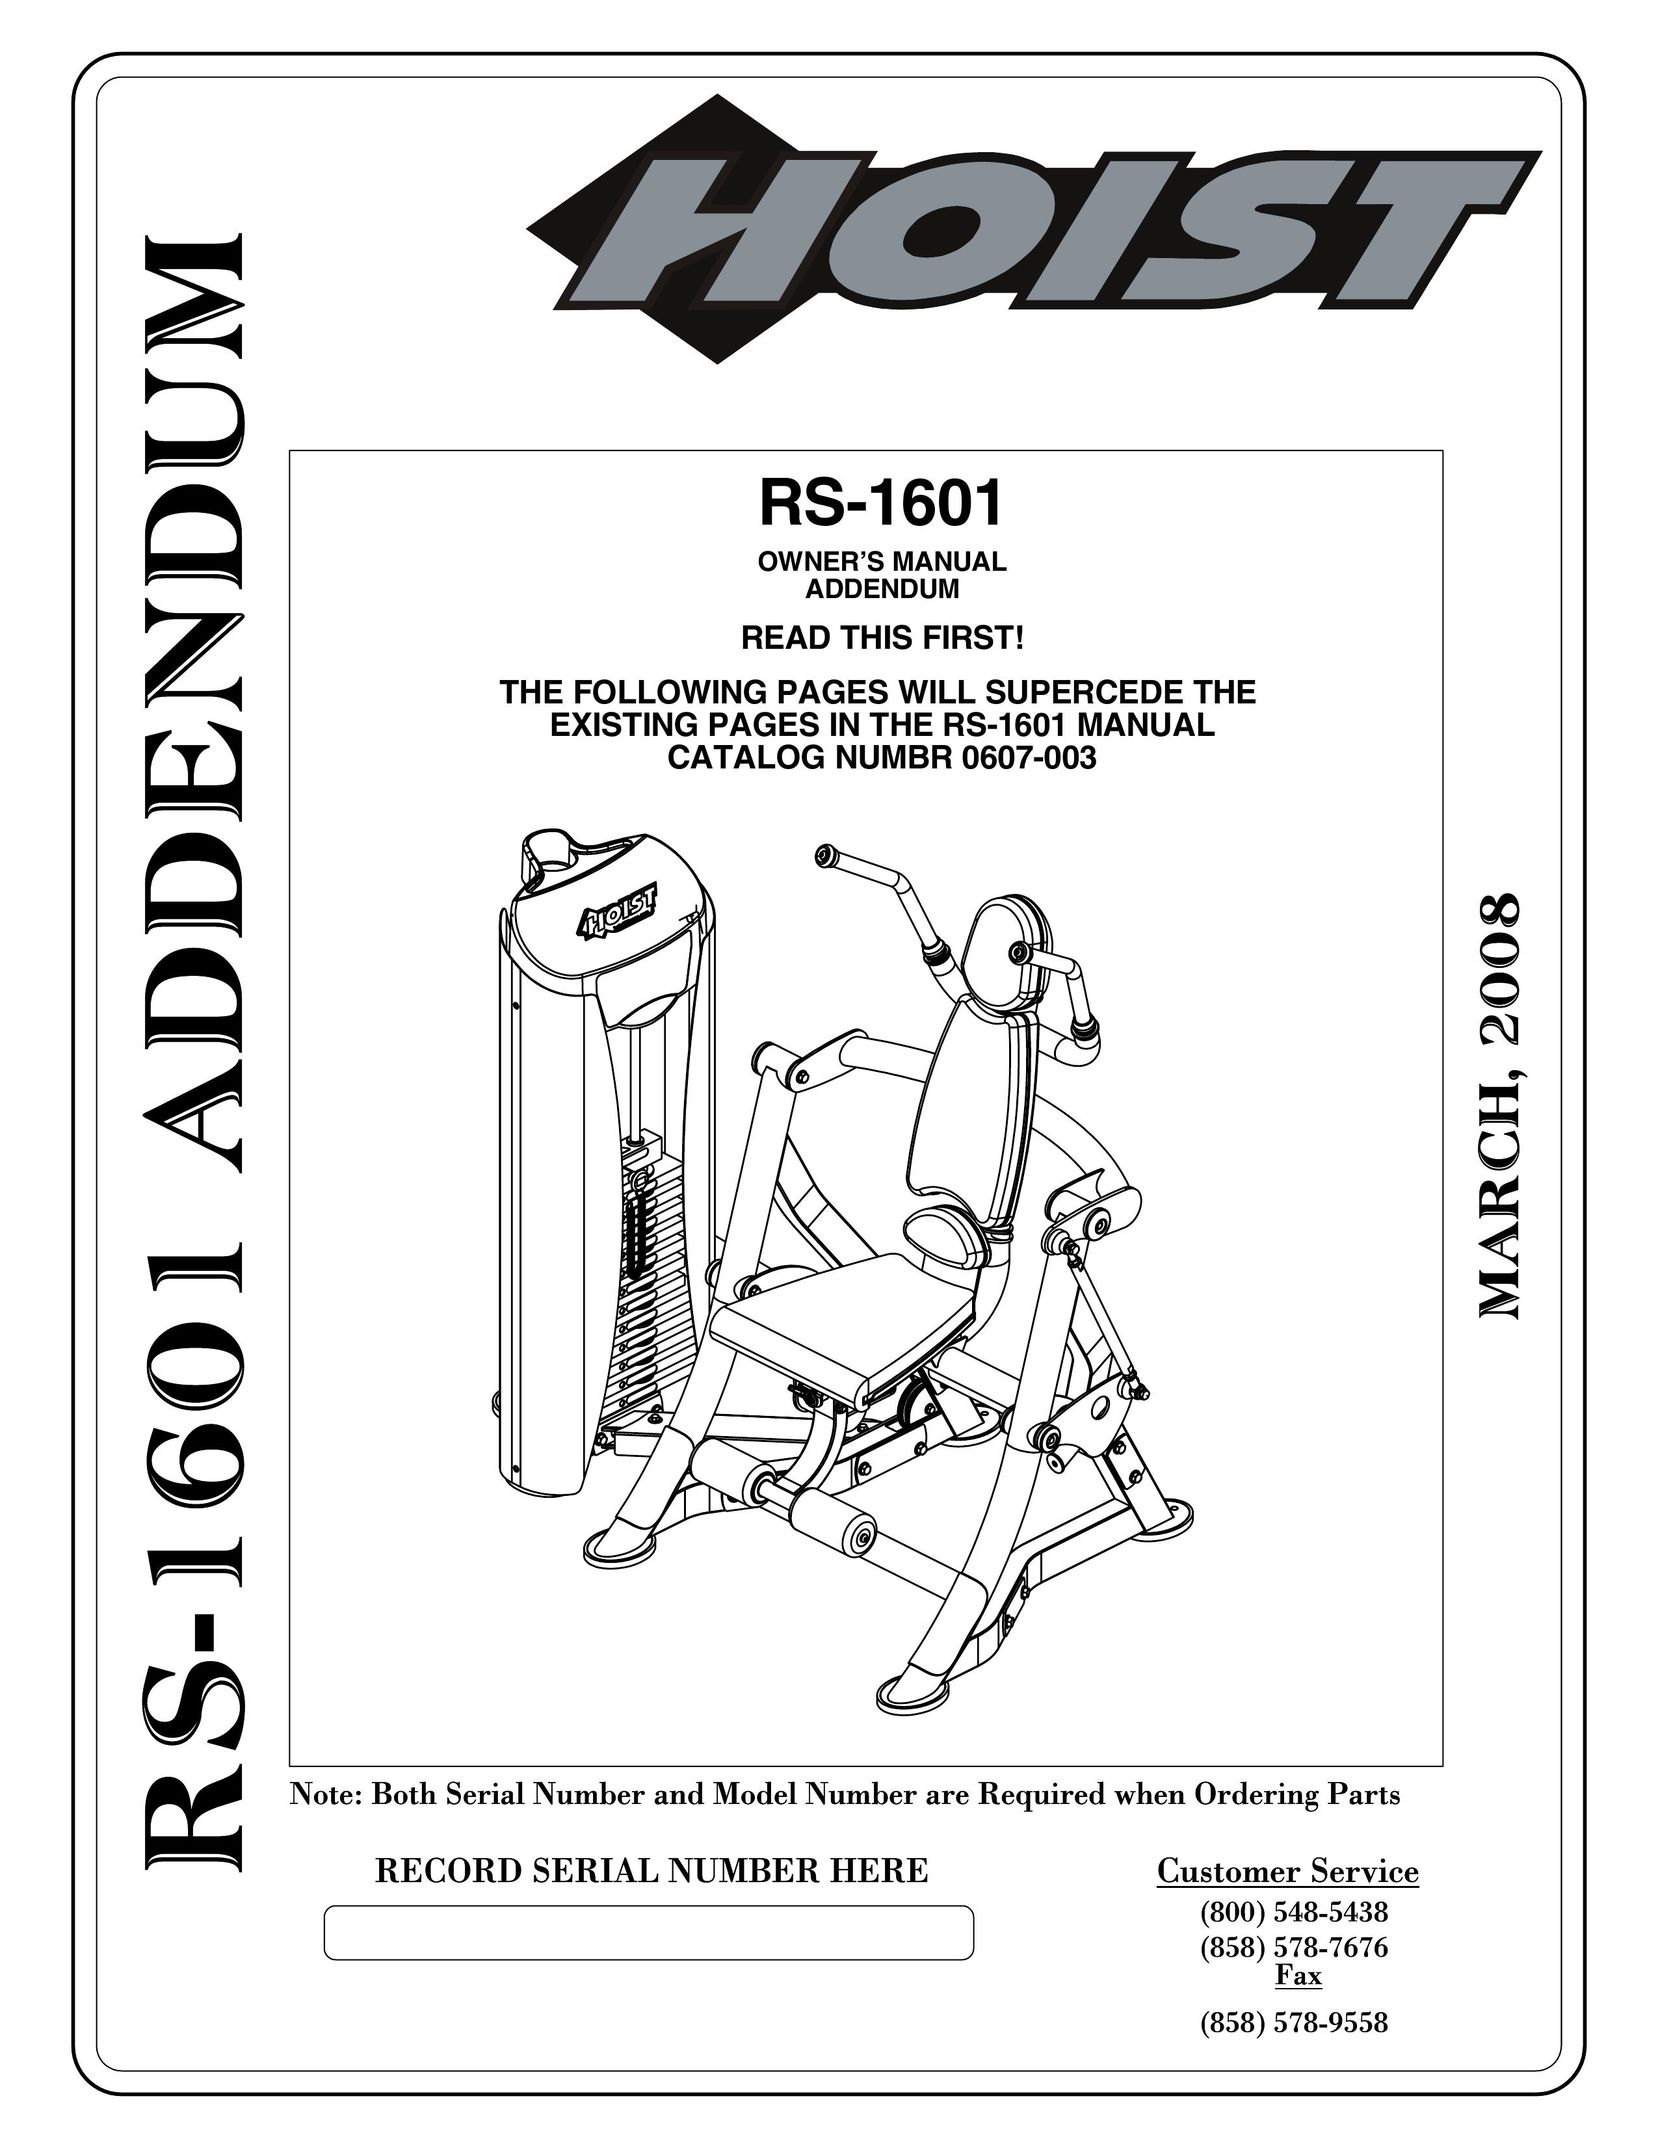 Hoist Fitness RS-1601 Baby Gym User Manual